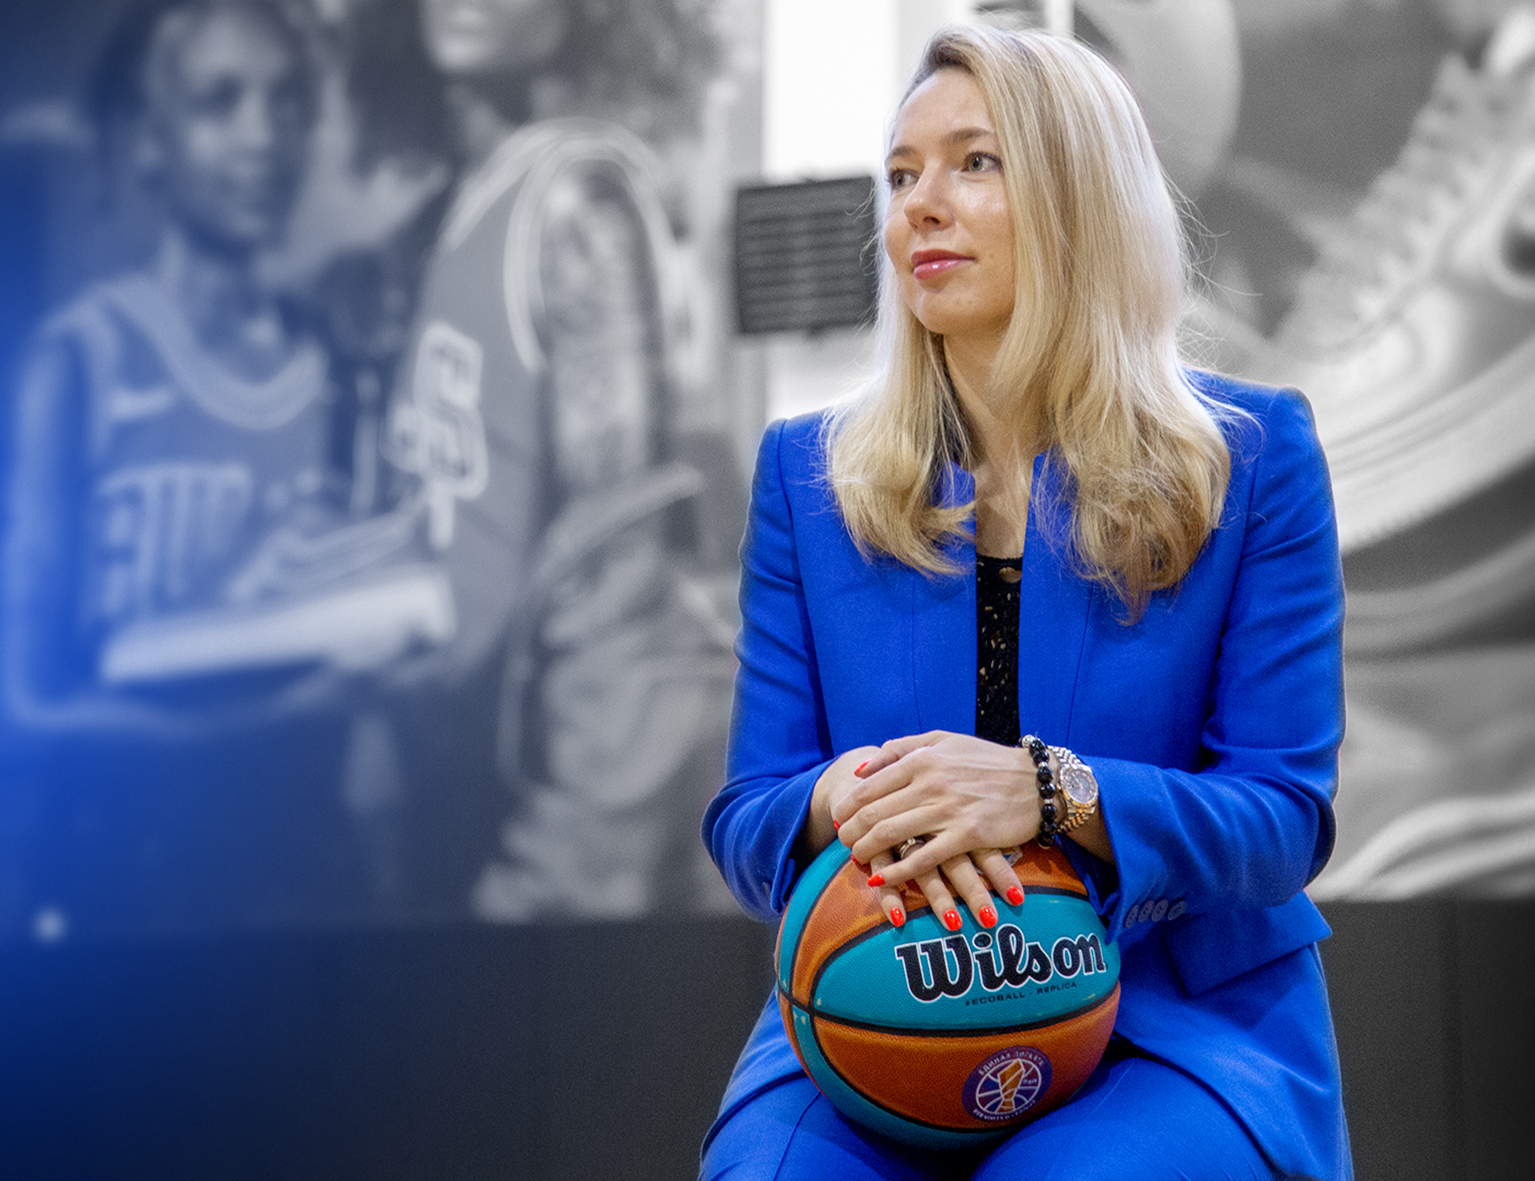 Ilona Korstin: League’s top priority is players and fans’ health